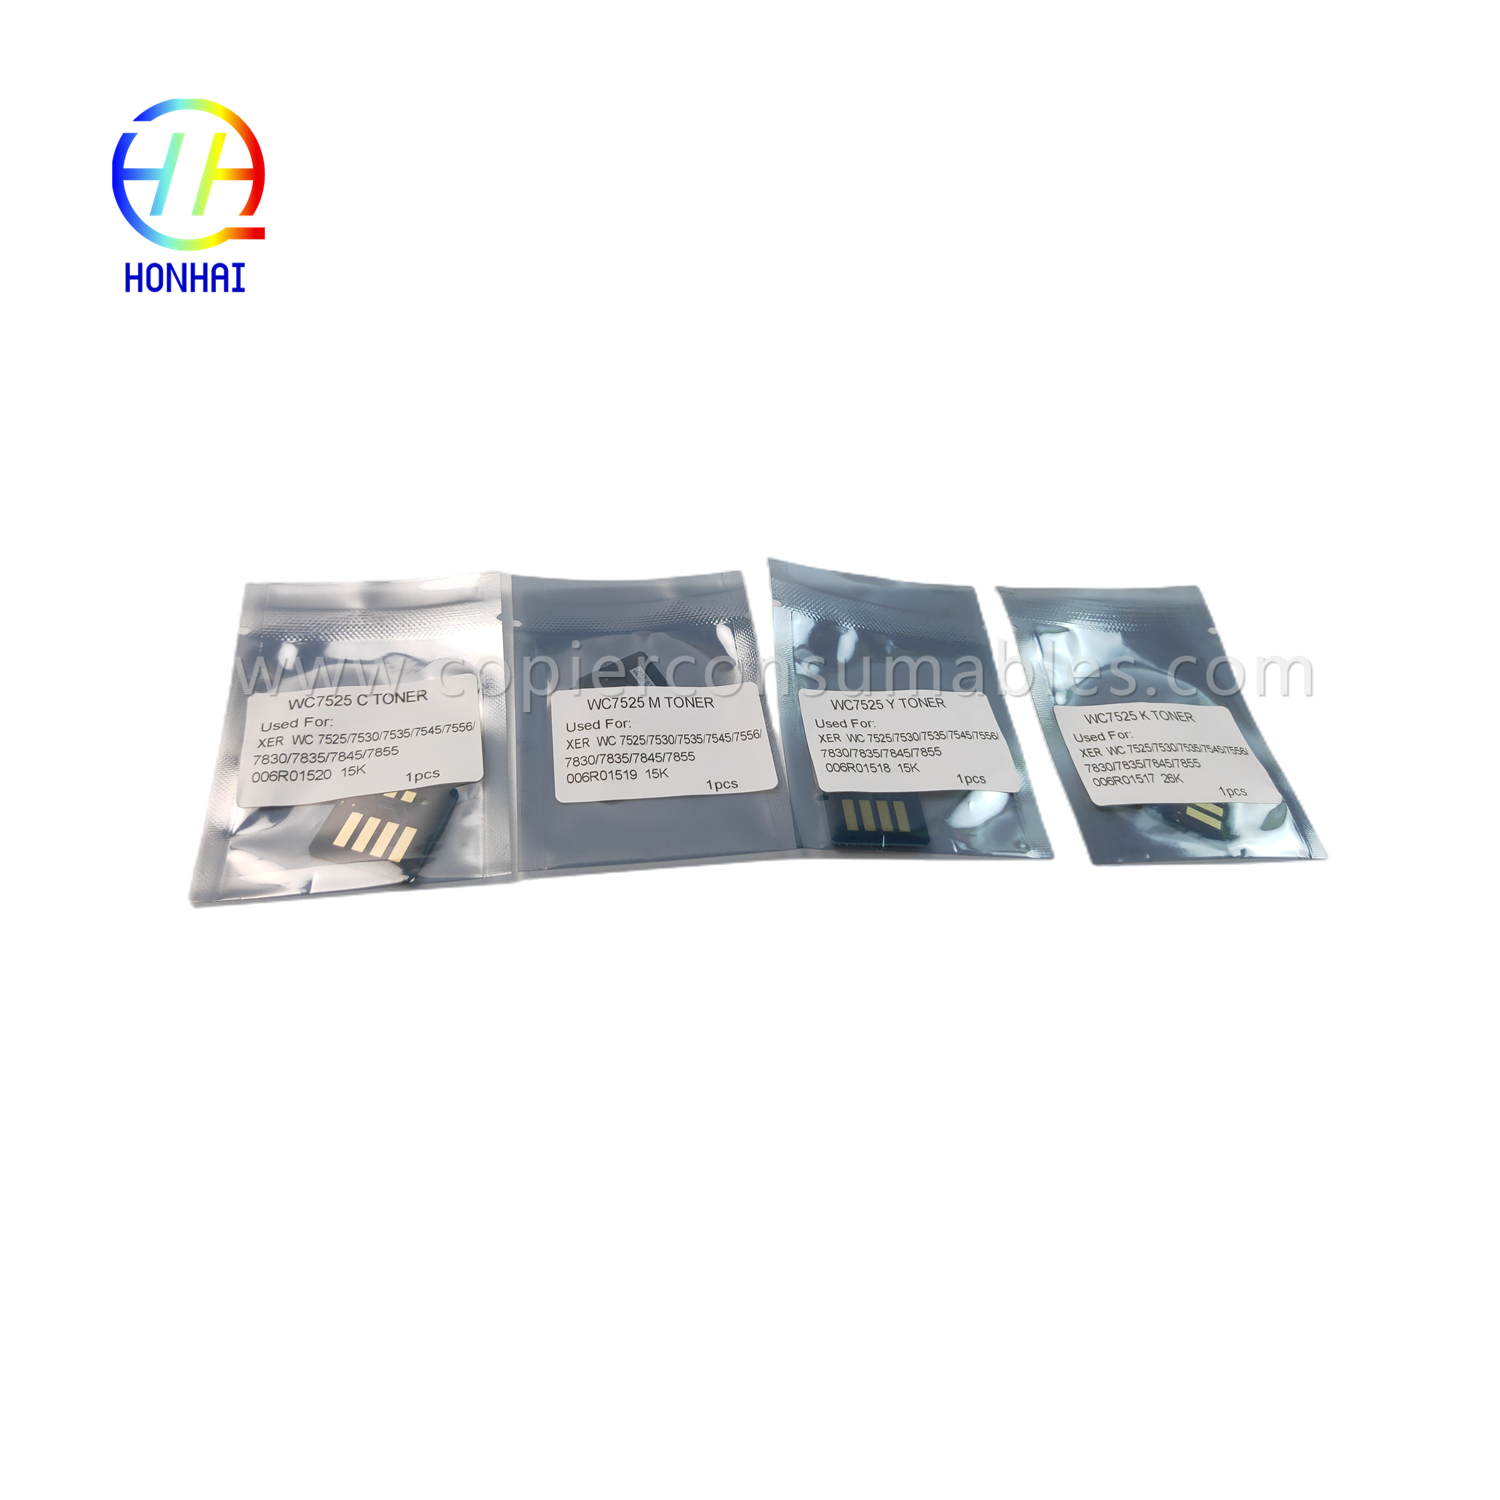 Toner Chip (set) for Xerox 7525 7530 7535 7830 7835 7845 7855 006R01517 006R01518 006R01519 006R01520 Chip_副本